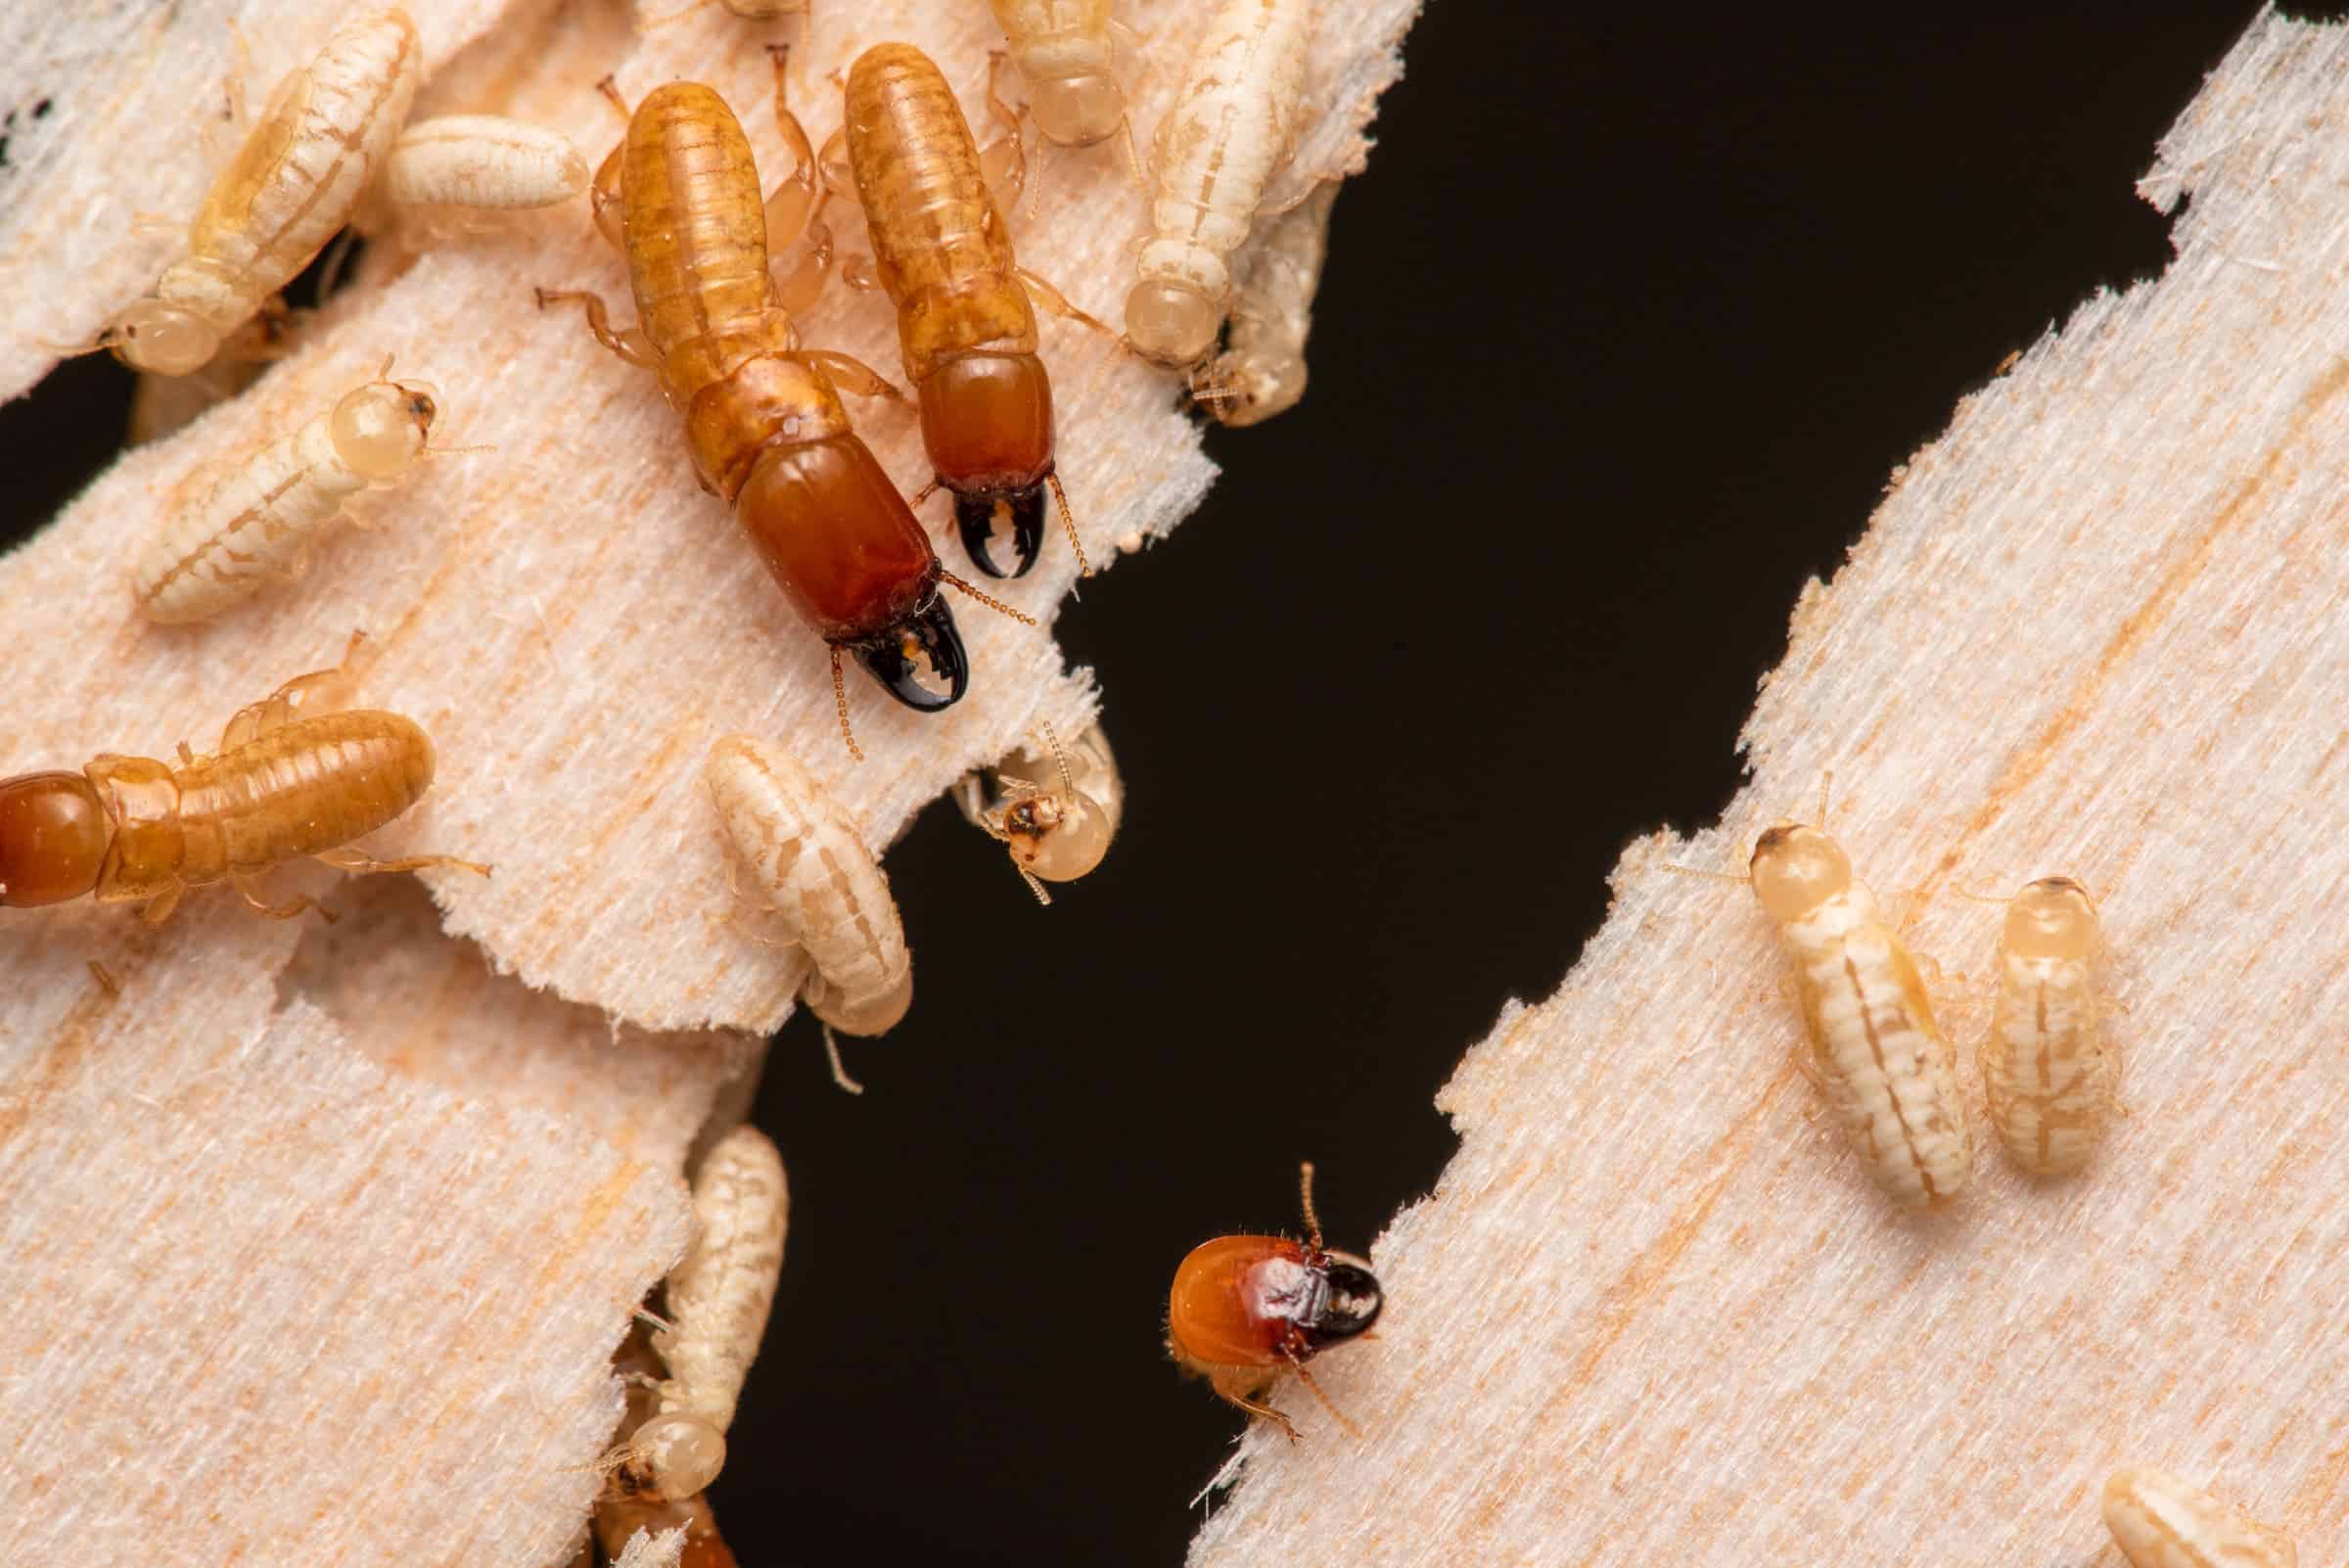 Family of termites has been traveling across the ocean for millions of years - ZME Science